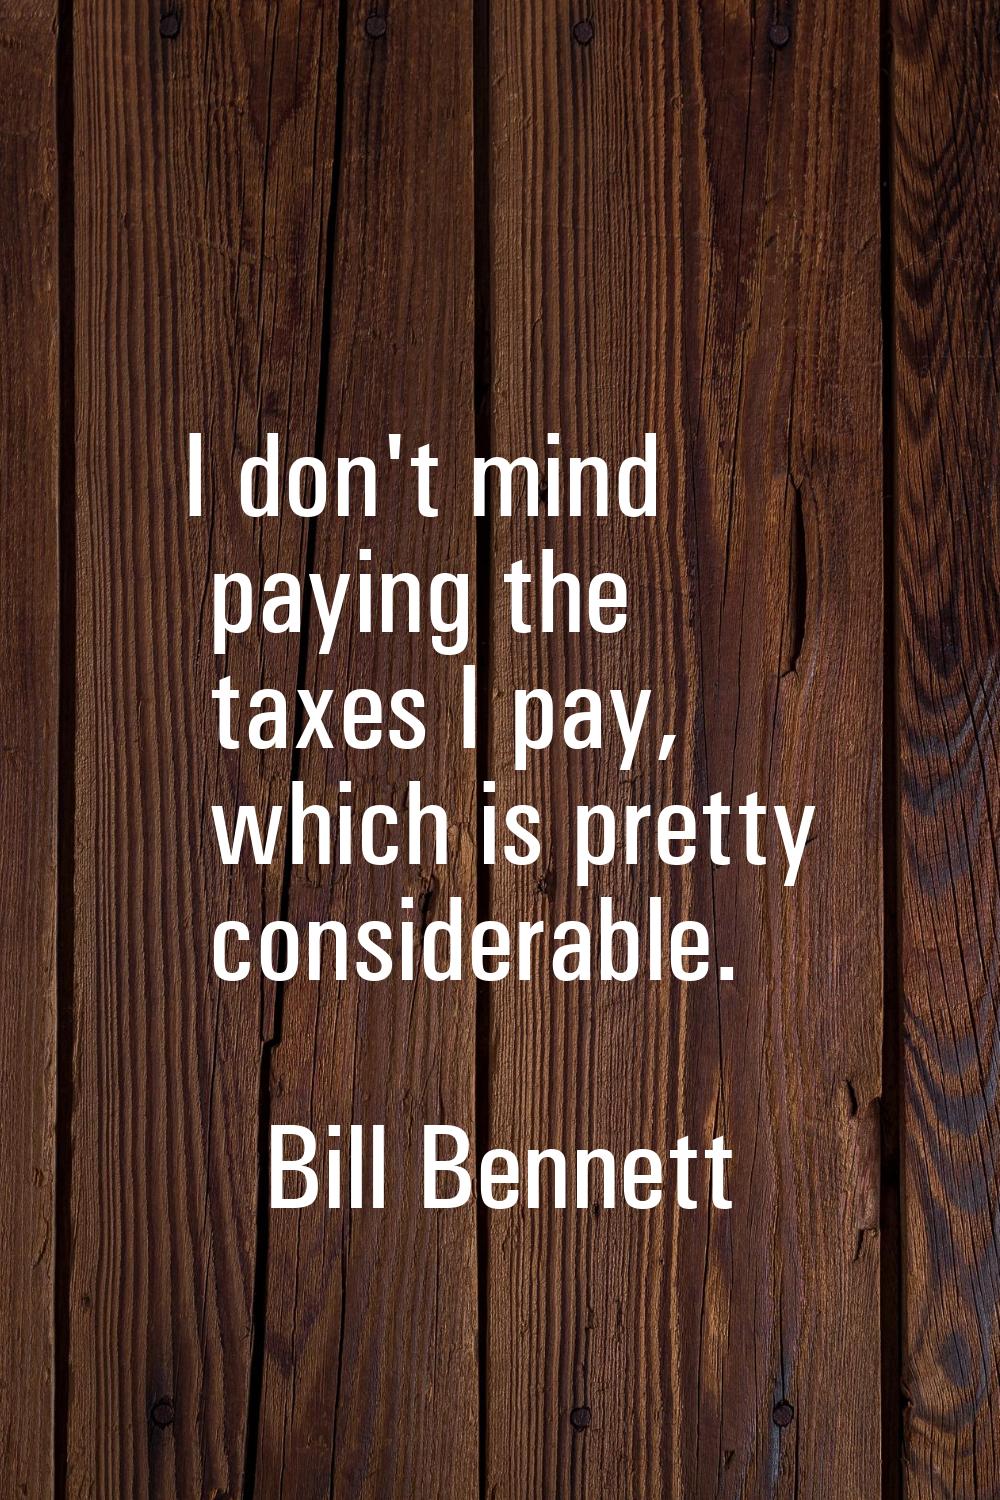 I don't mind paying the taxes I pay, which is pretty considerable.